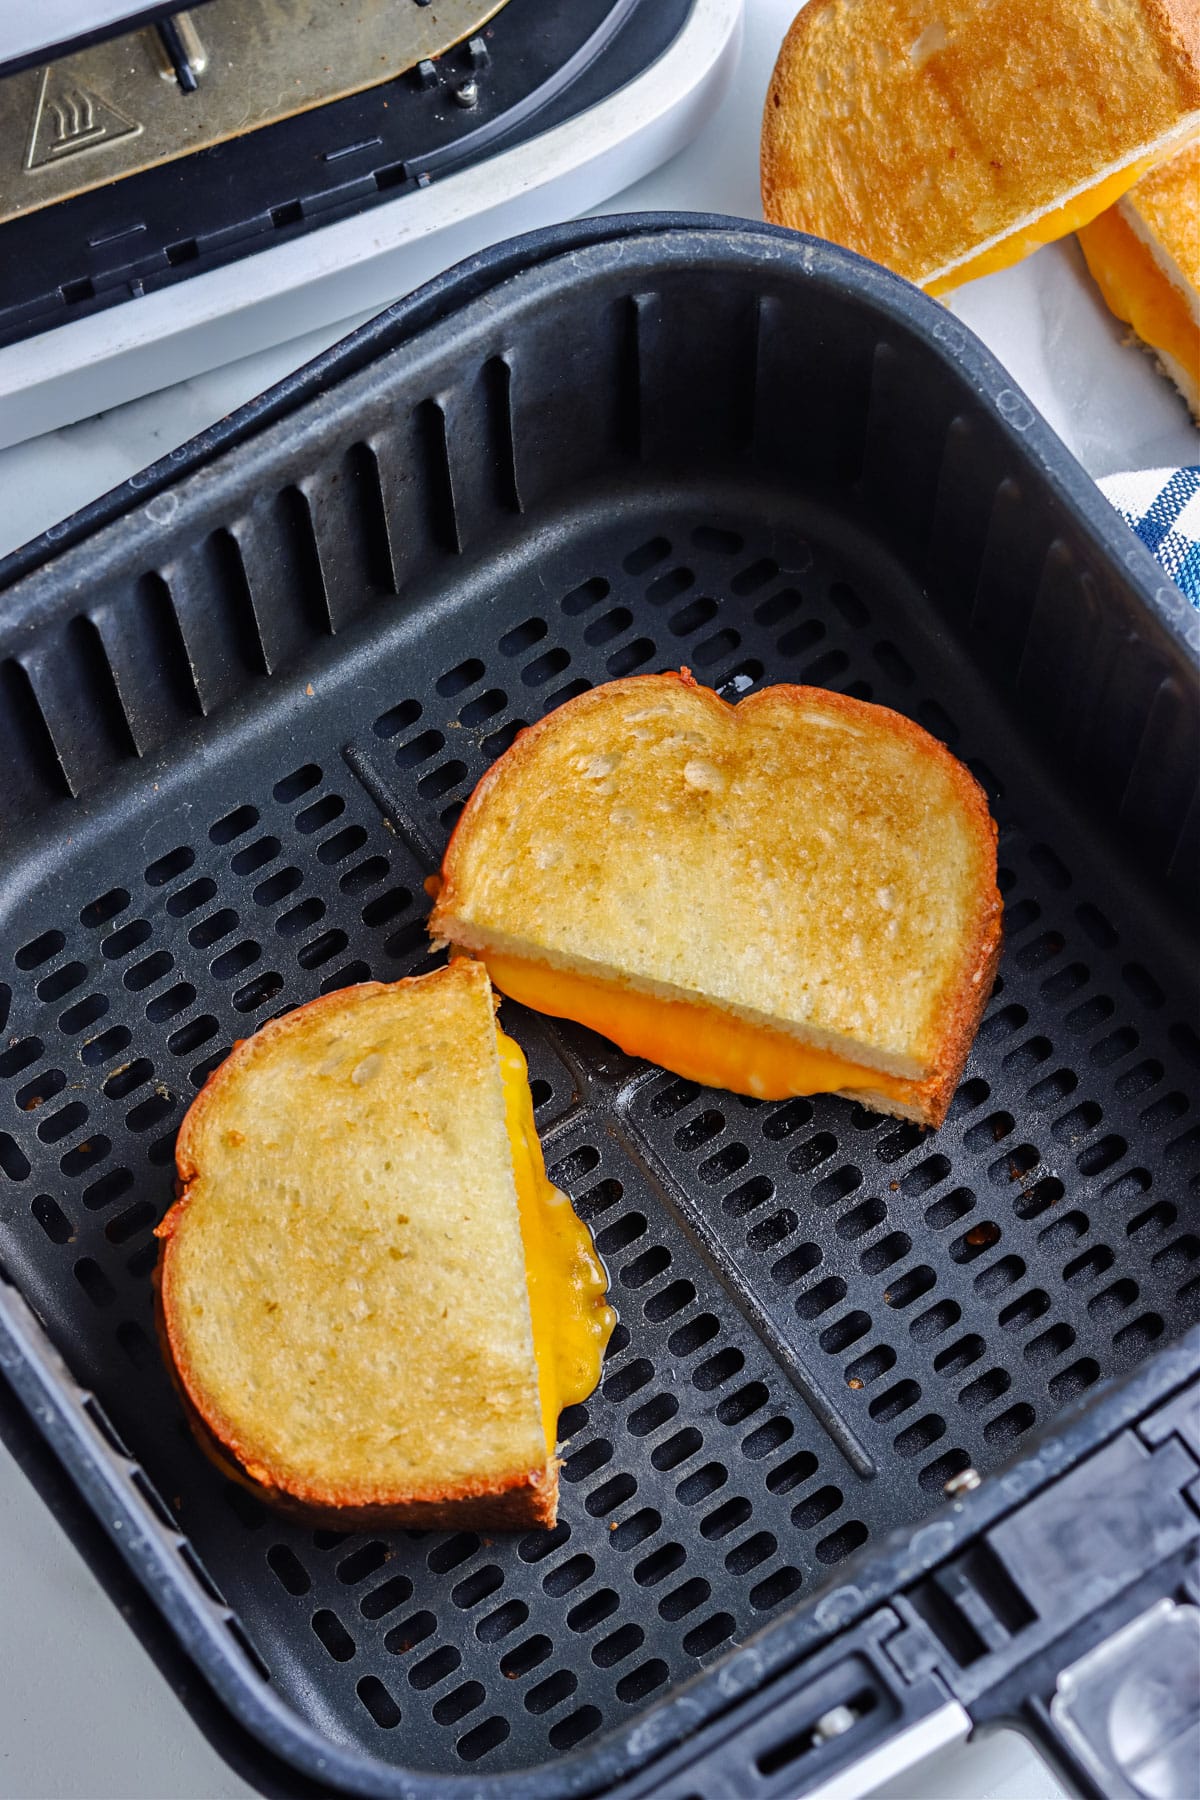 The finished Grilled Cheese in an Air Fryer.